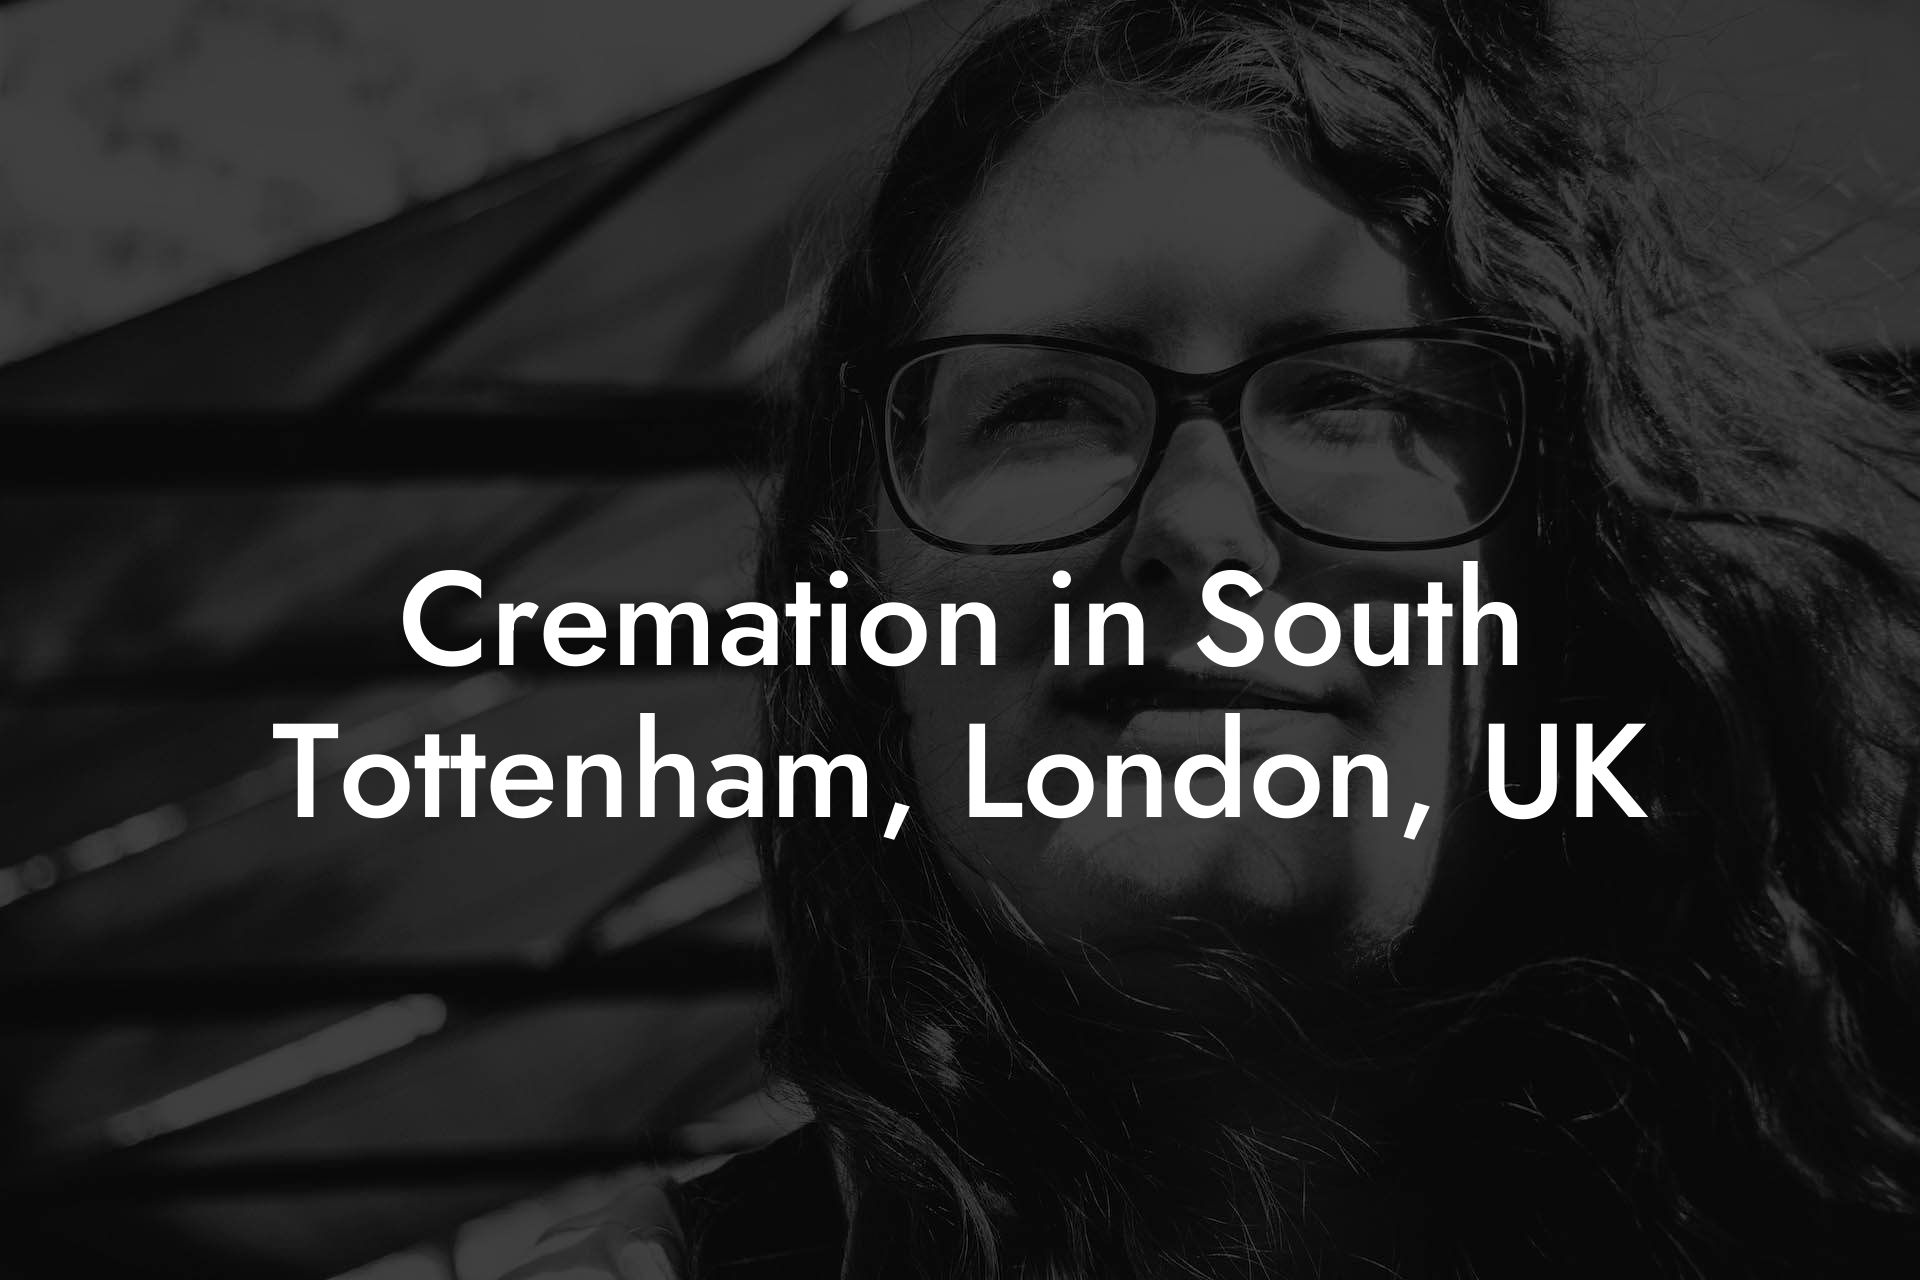 Cremation in South Tottenham, London, UK